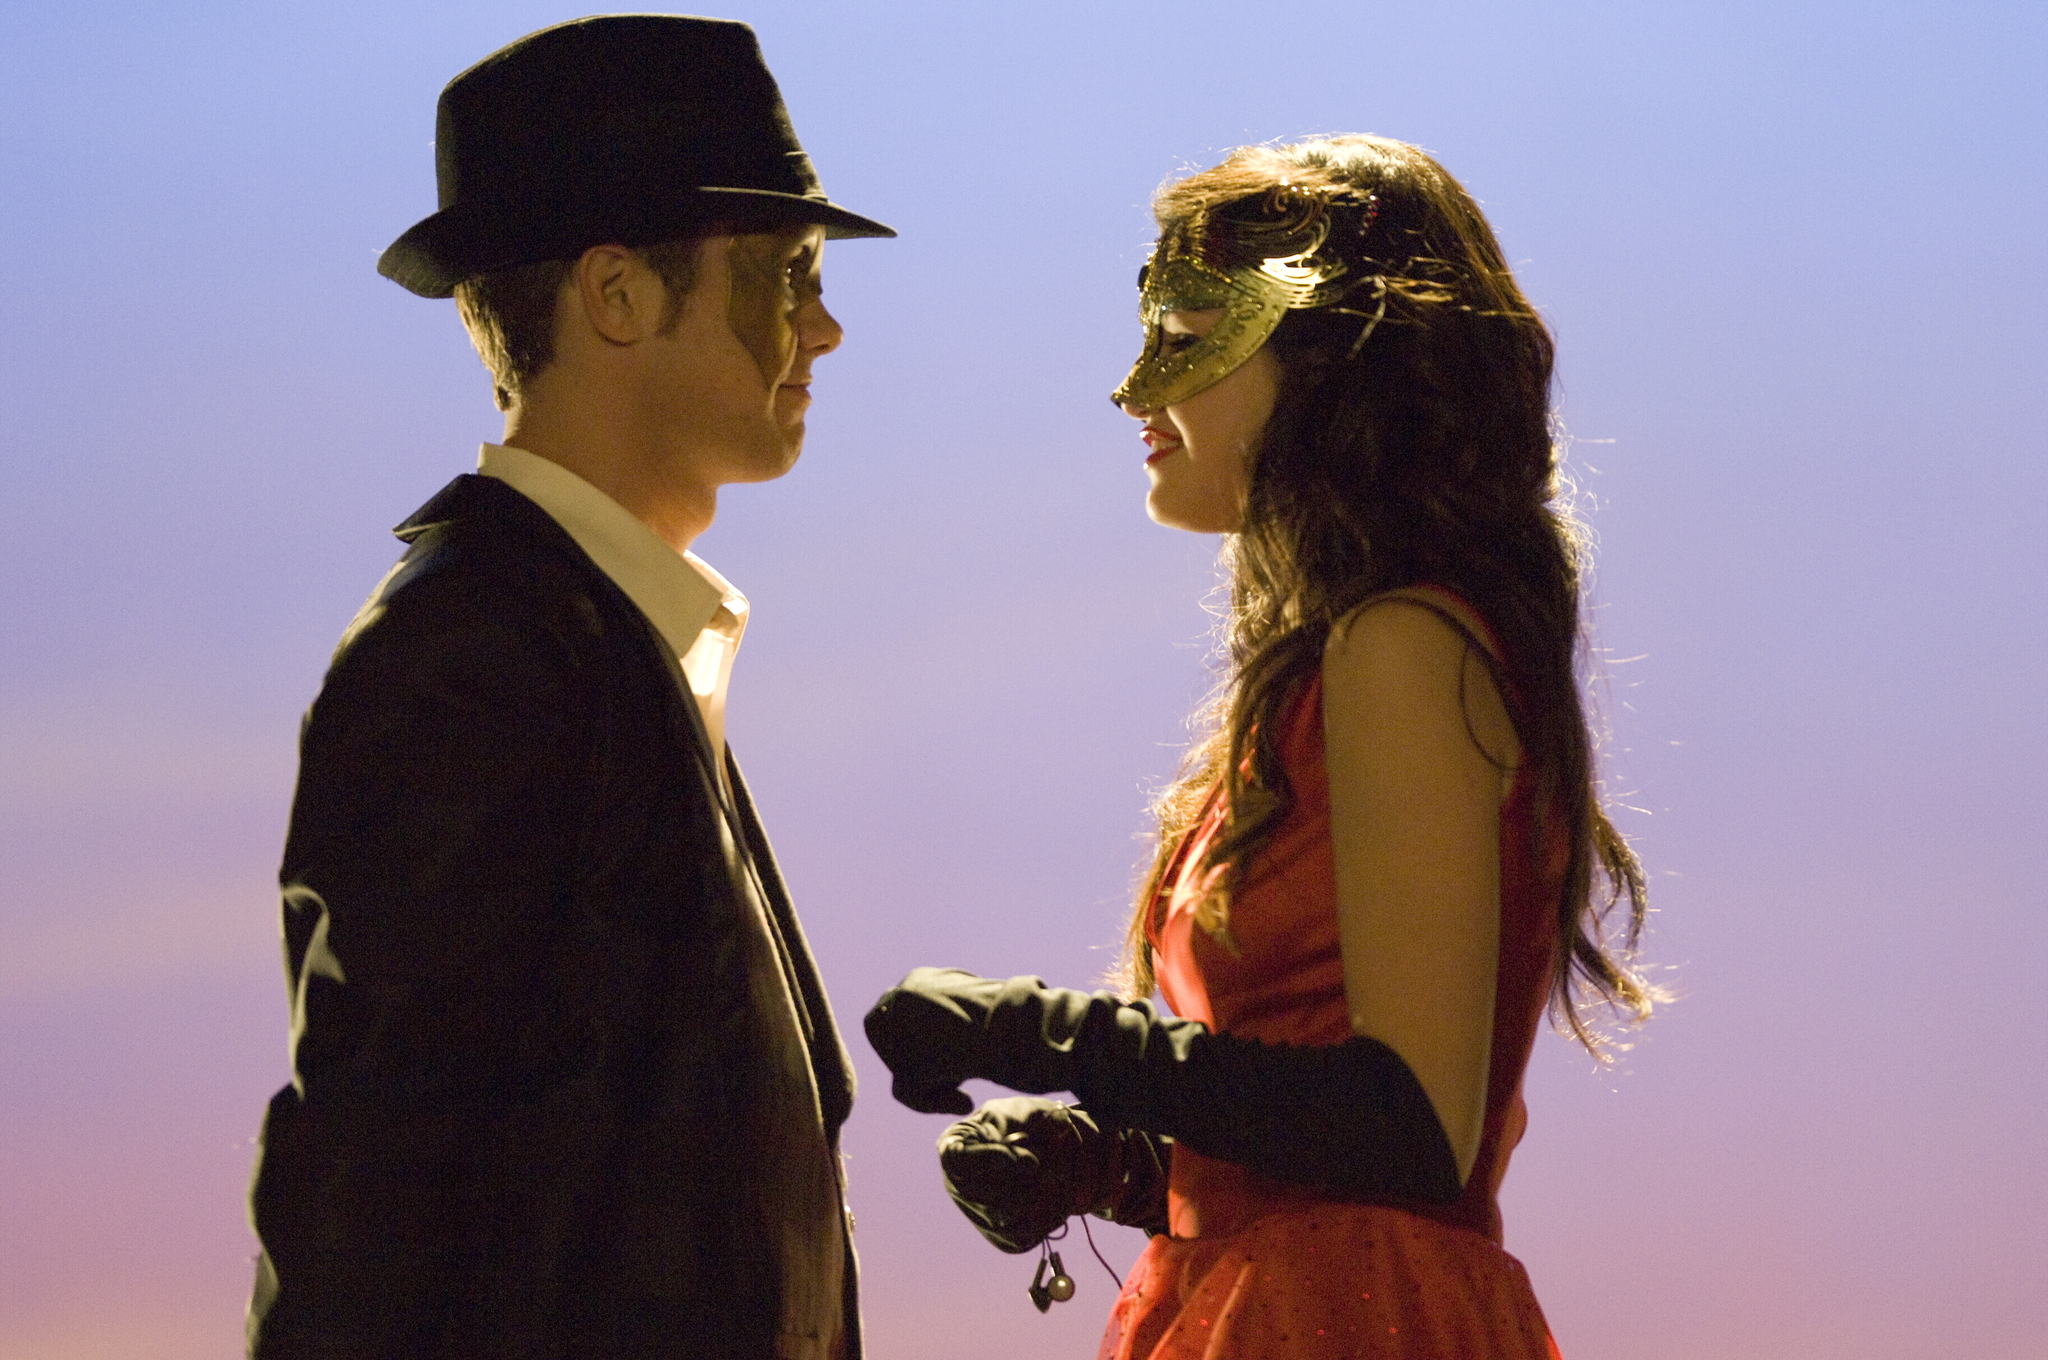 Still of Drew Seeley and Selena Gomez in Another Cinderella Story (2008)